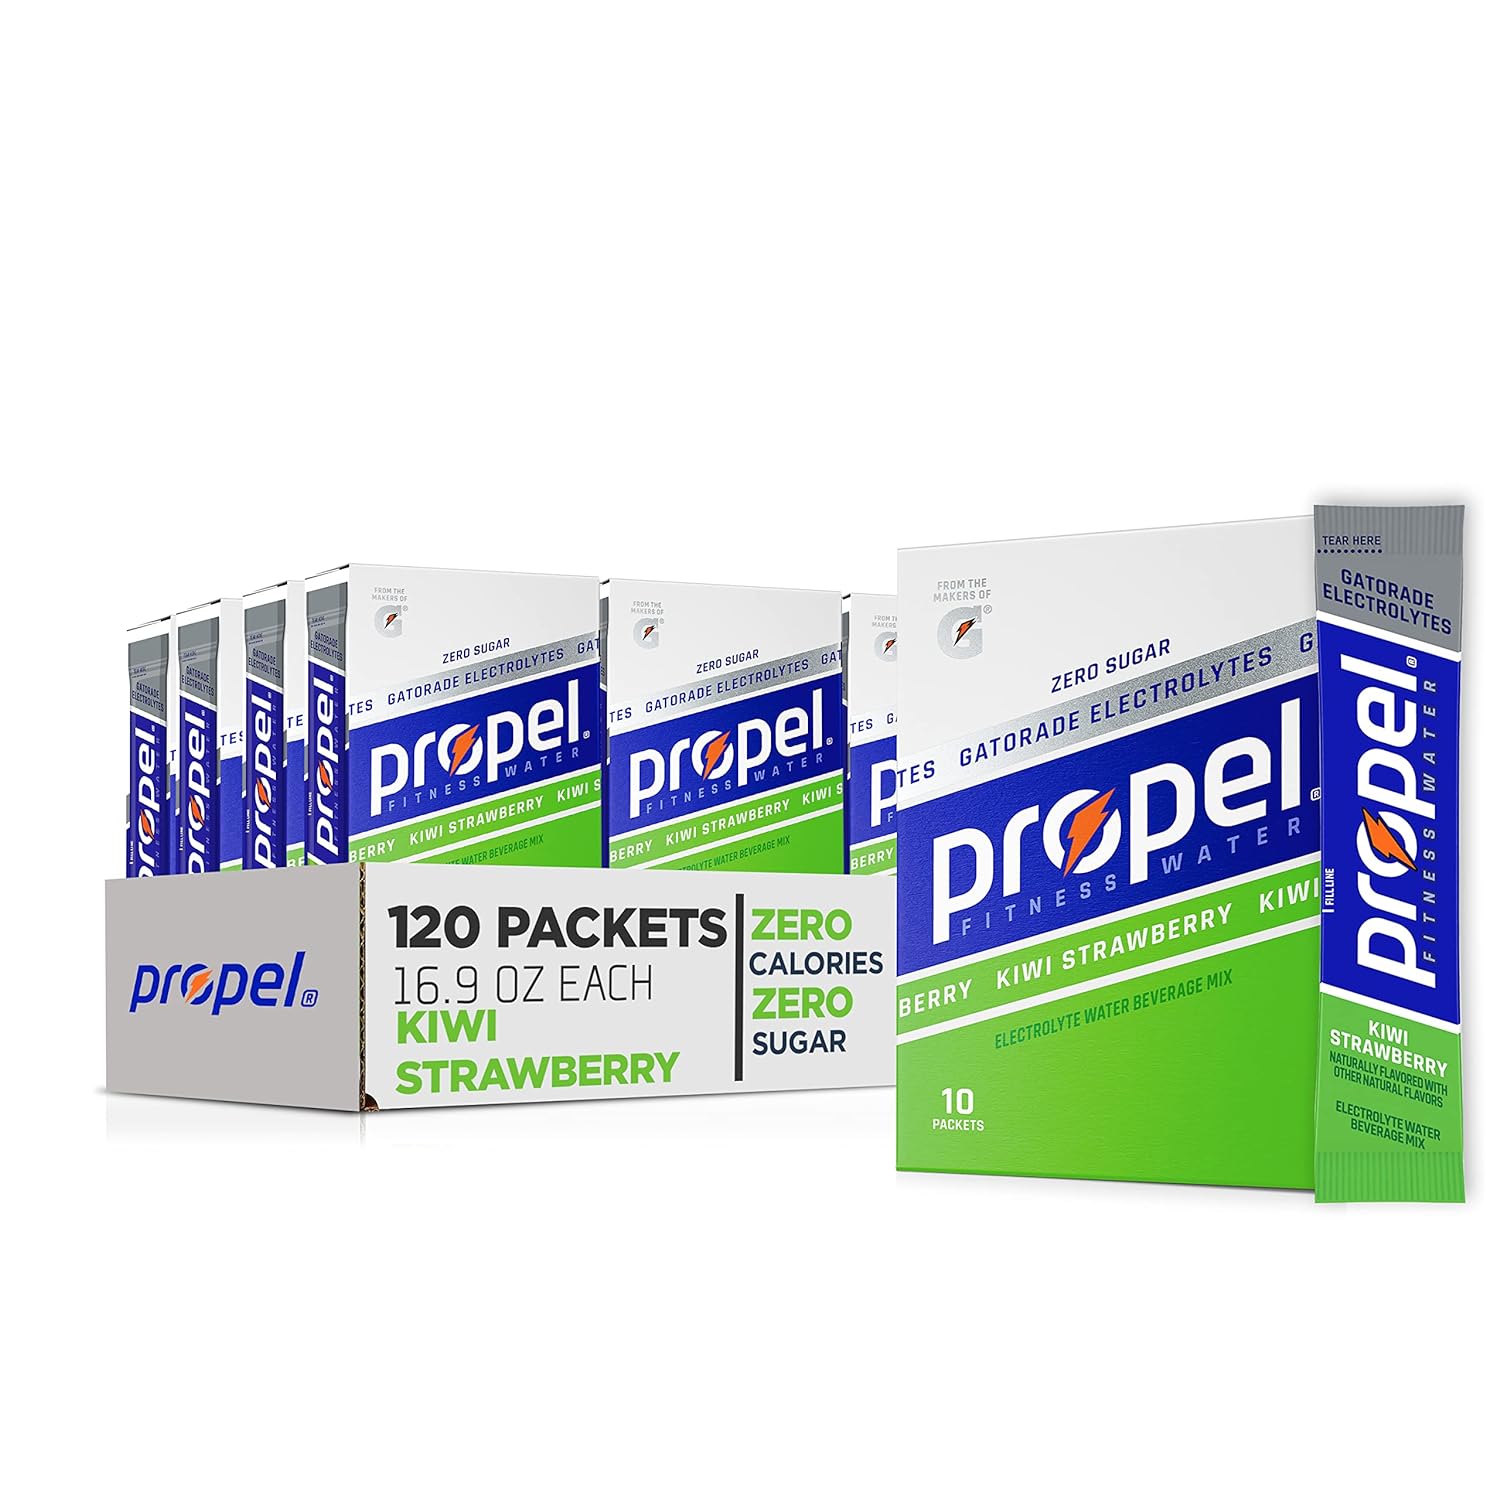 Propel Powder Packets, Kiwi Strawberry With Electrolytes, Vitamins and No Sugar, Pack of 12, 10 Packets each, Total 120 packets (Packaging May Vary)